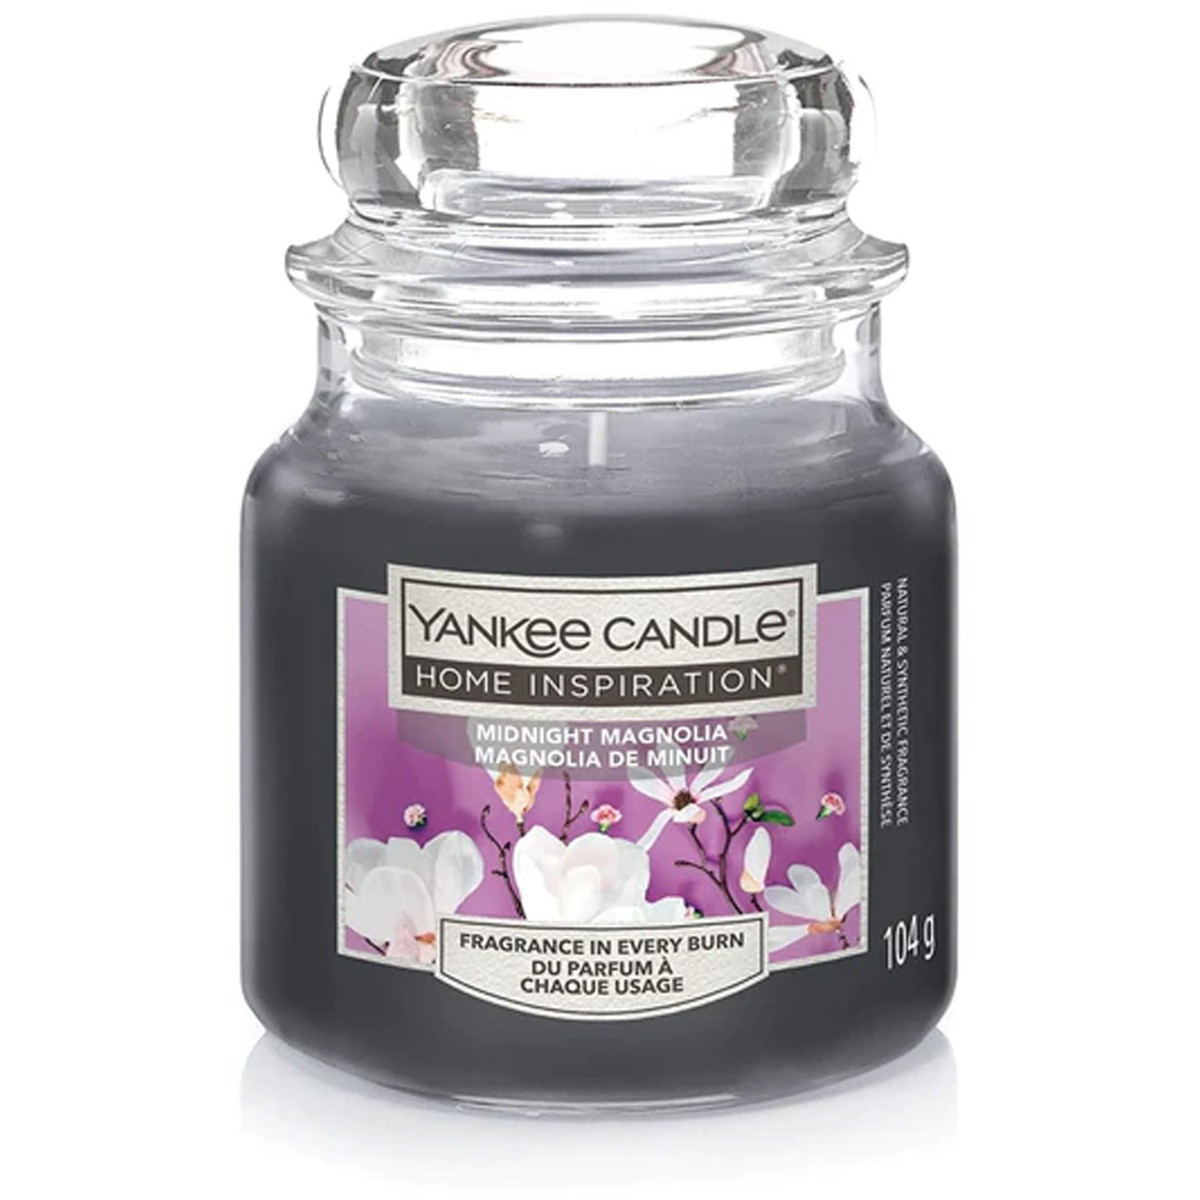 Yankee Candle Home Inspiration Small Jar - Midnight Magnolia>